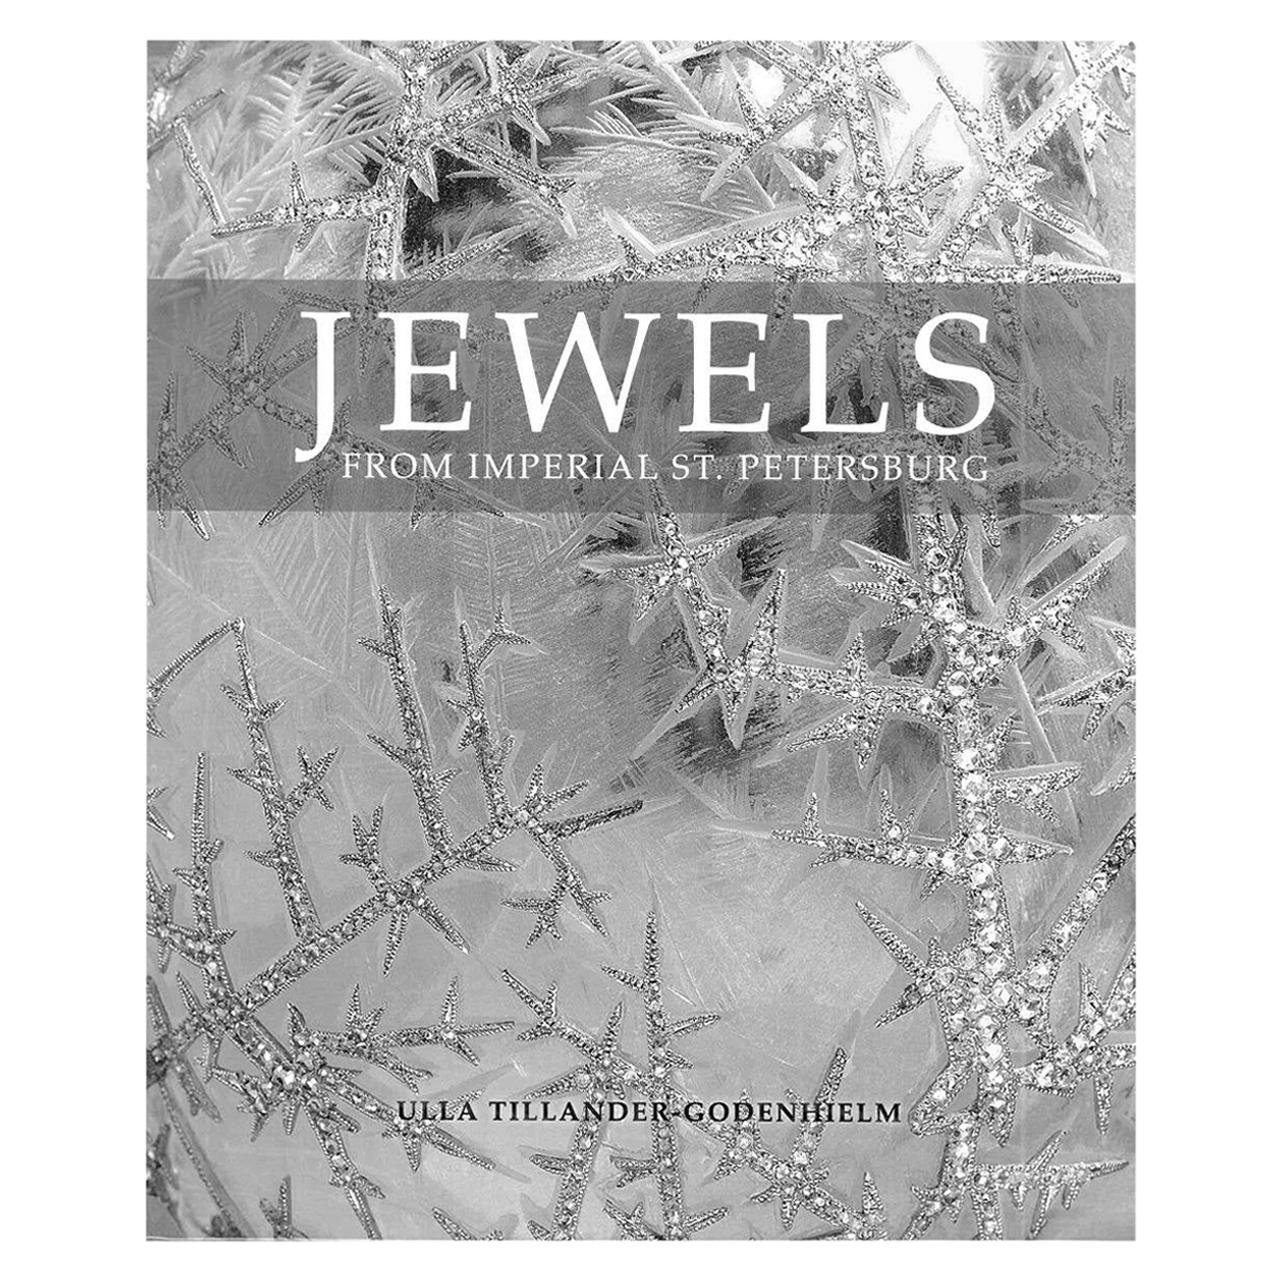 Book of Jewels from Imperial St. Petersburg